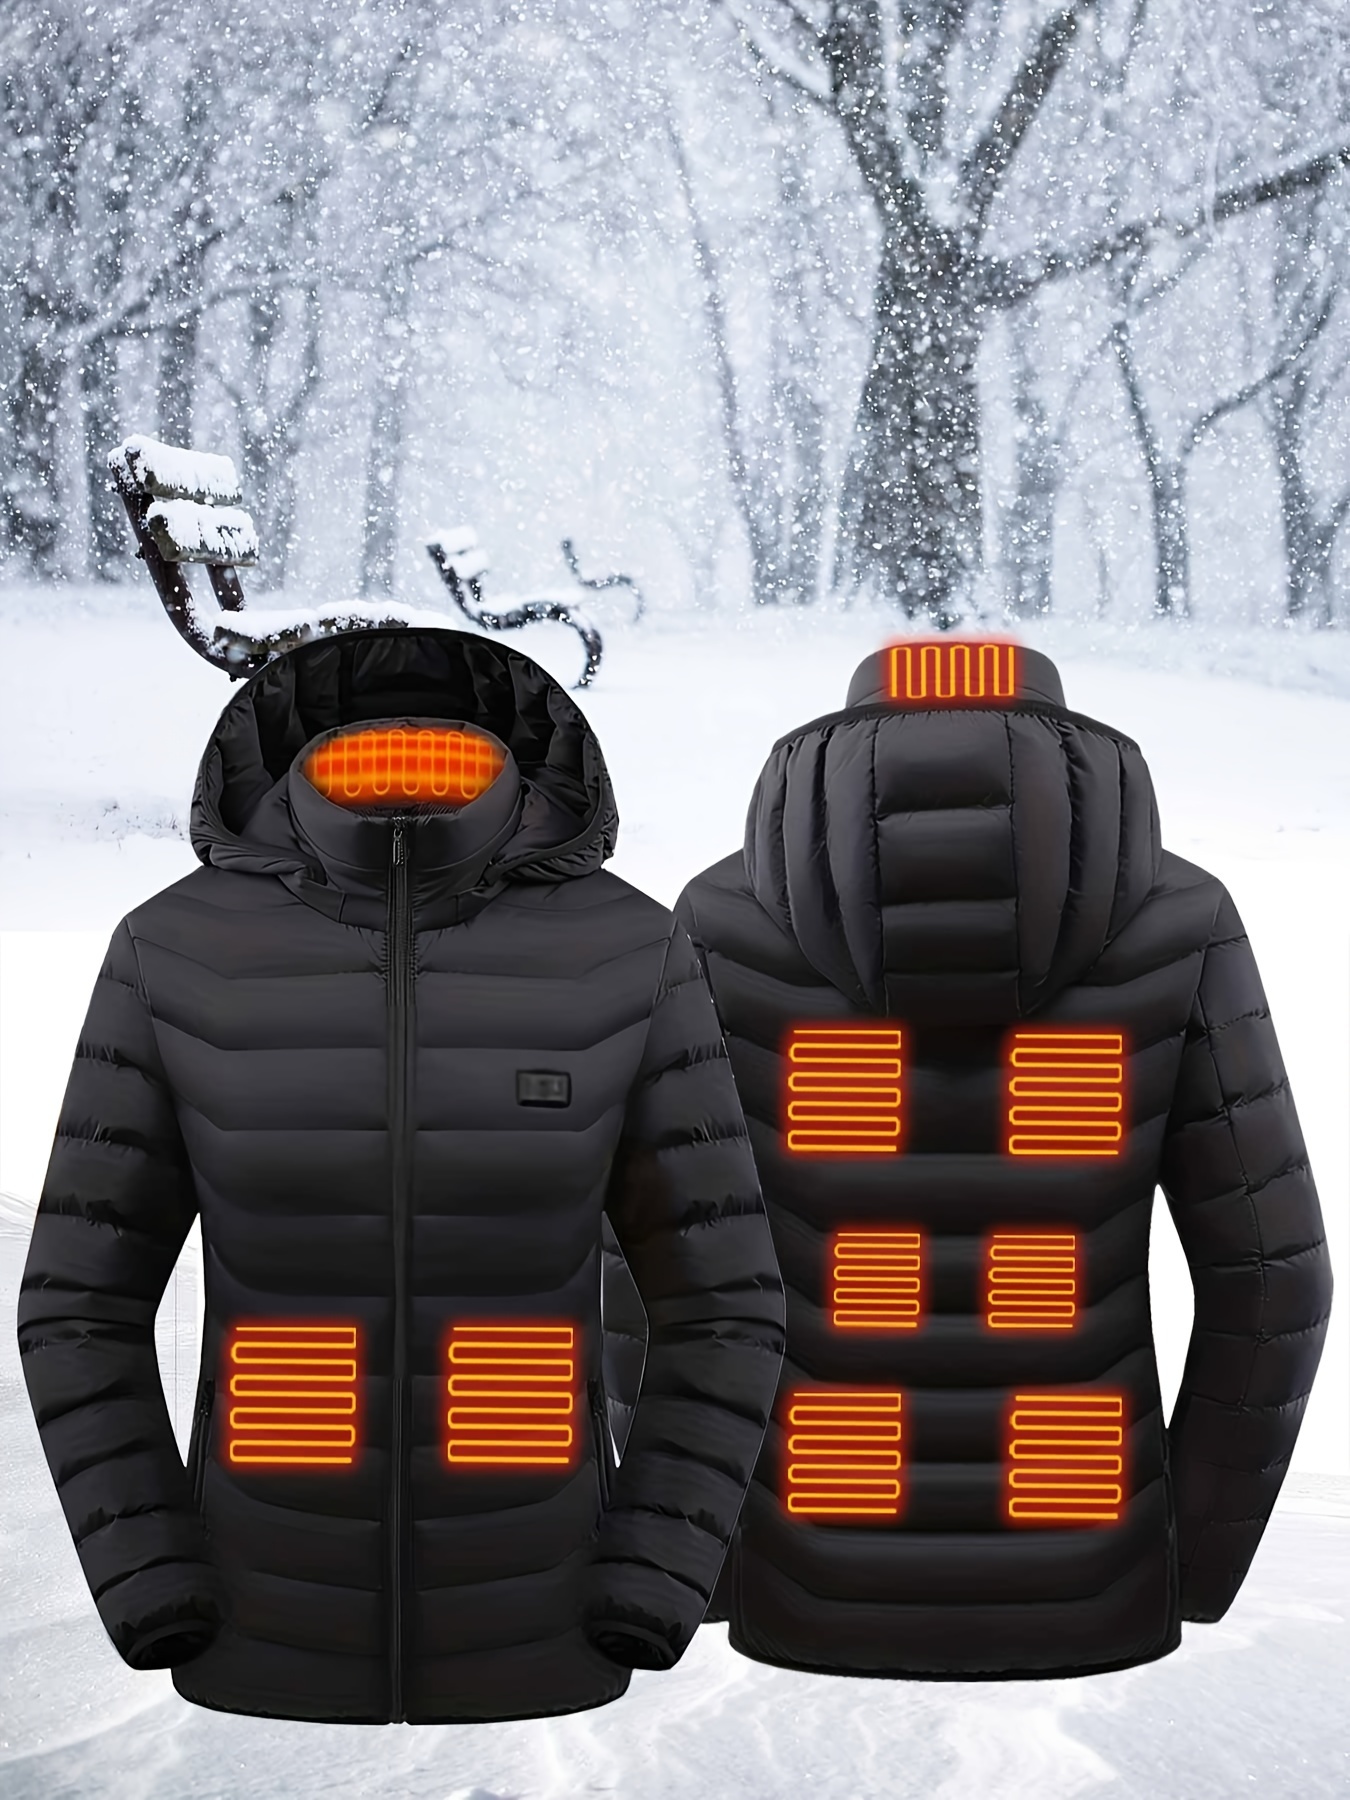 Heated Thermal Underwear Winter Ski USB Electric Thermal Suit Long